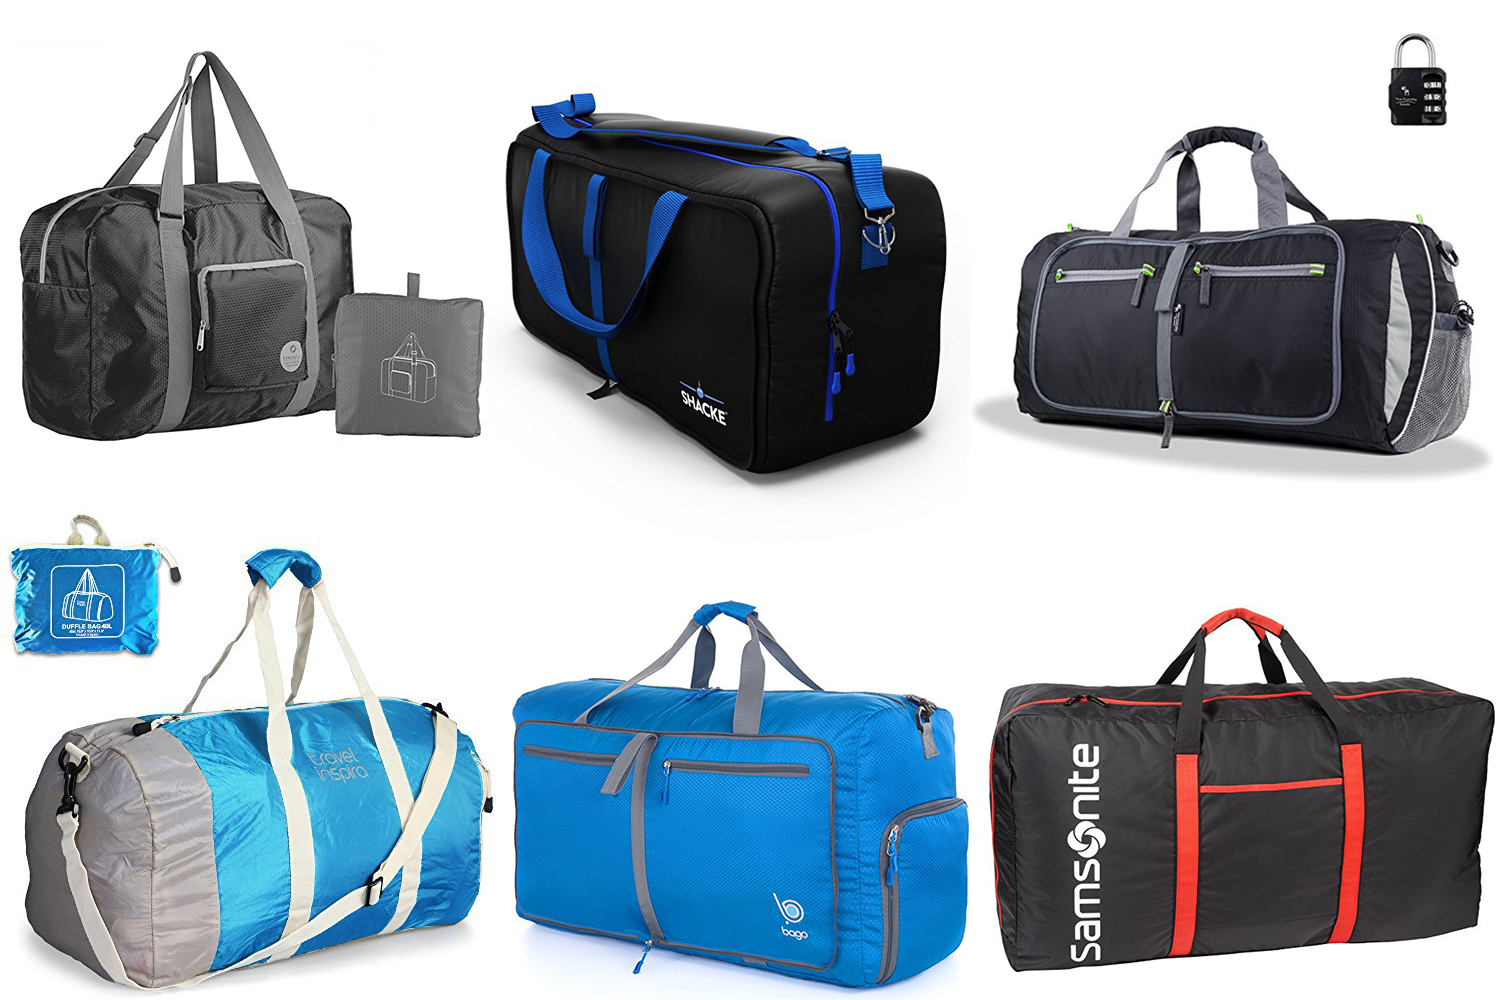 Best Travel / Foldable / Collapsible Duffel Bags